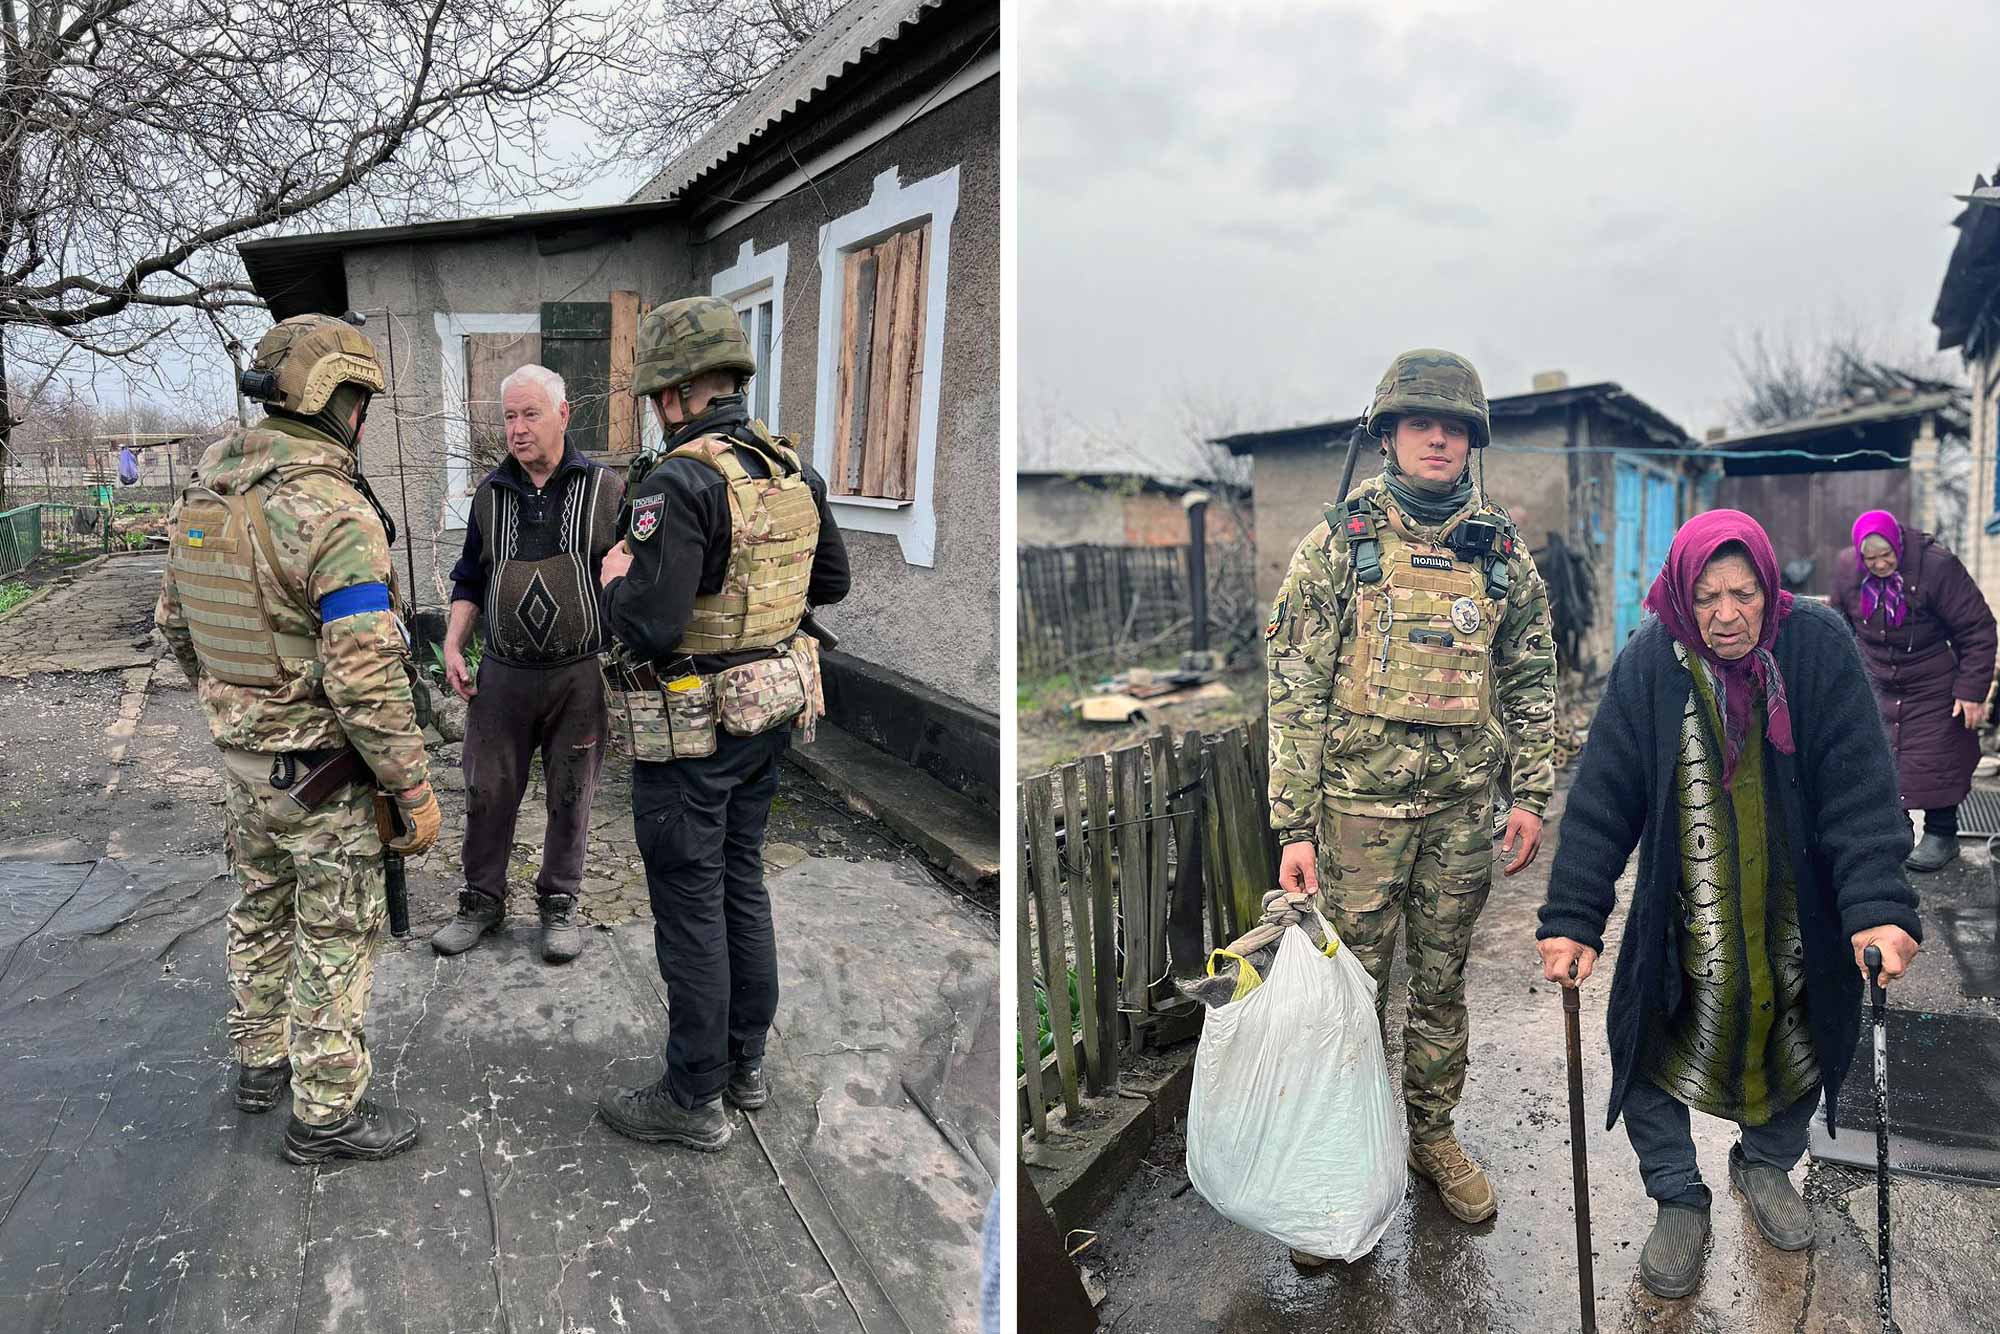 (L) The White Angel crew asking Tymofiy who lives in a private house to evacuate. (R) Dmytro Solovey, a member of White Angel crew, evacuating residents of Avdiivka. © O. Golovina